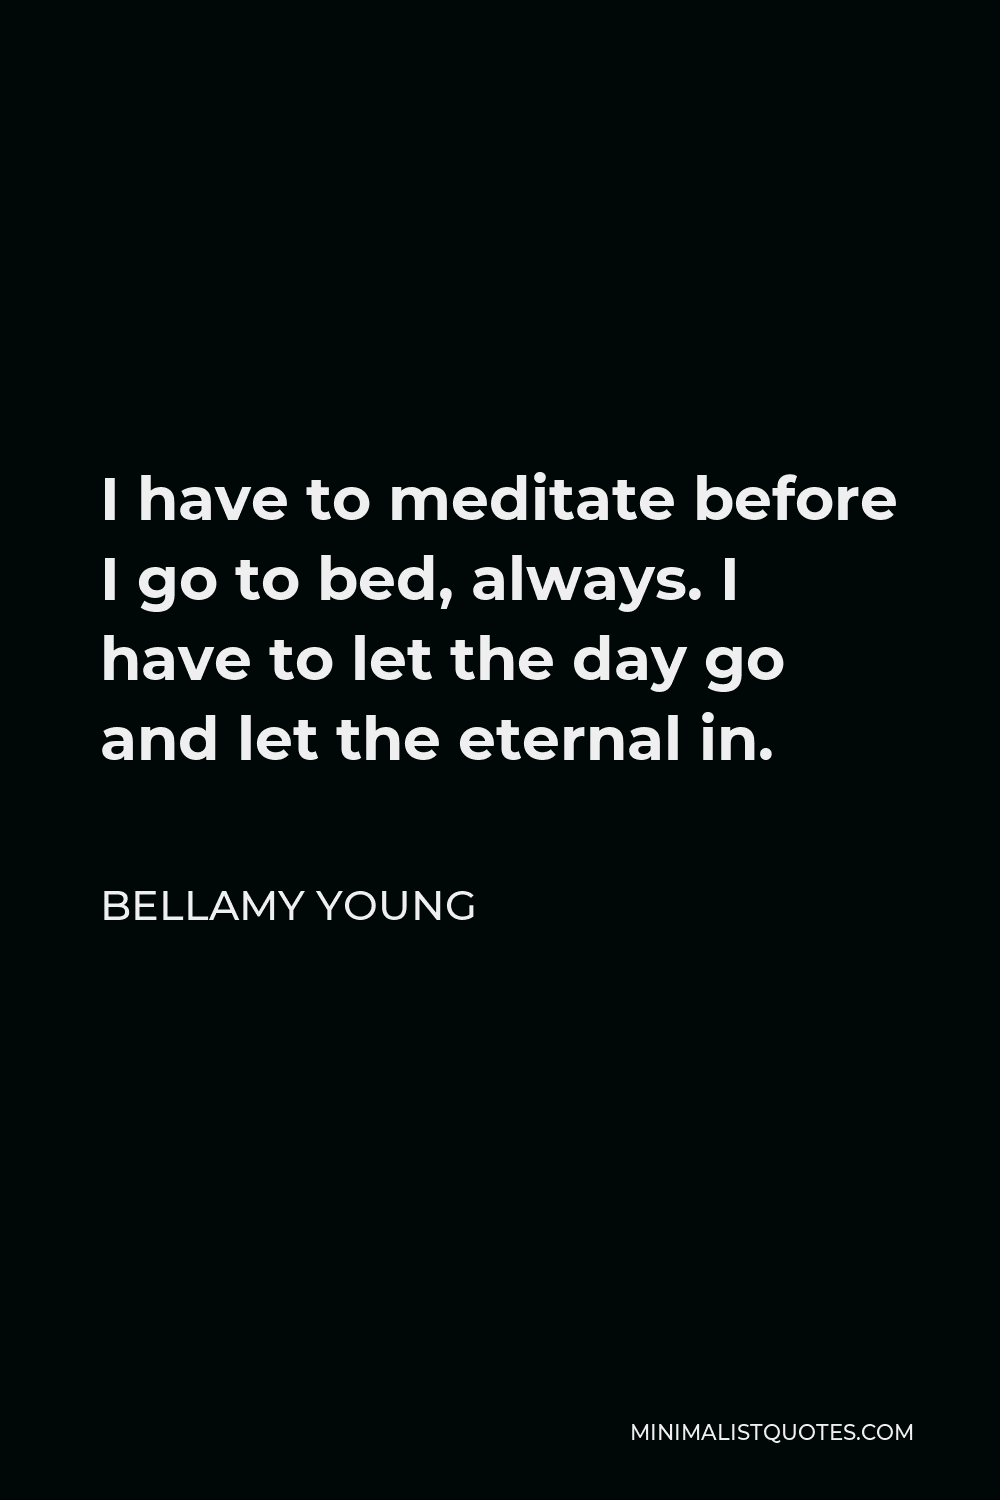 Bellamy Young Quote - I have to meditate before I go to bed, always. I have to let the day go and let the eternal in.